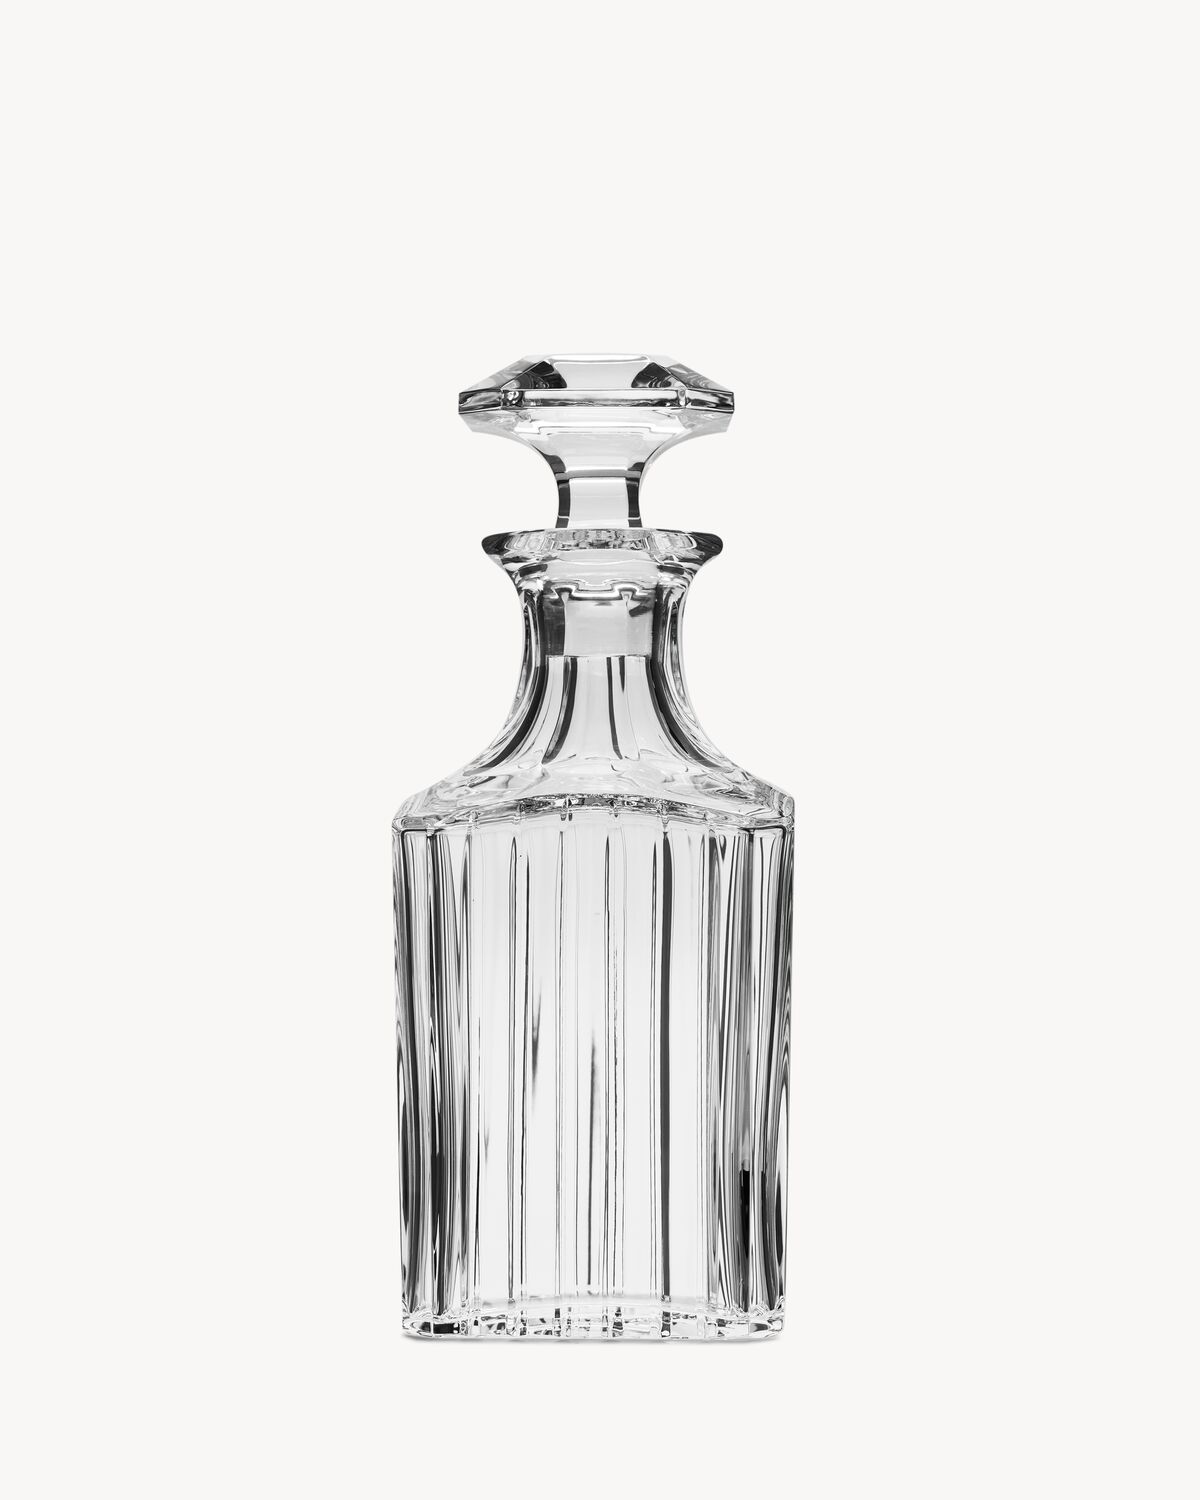 Baccarat Harmonie whiskey squared decanter